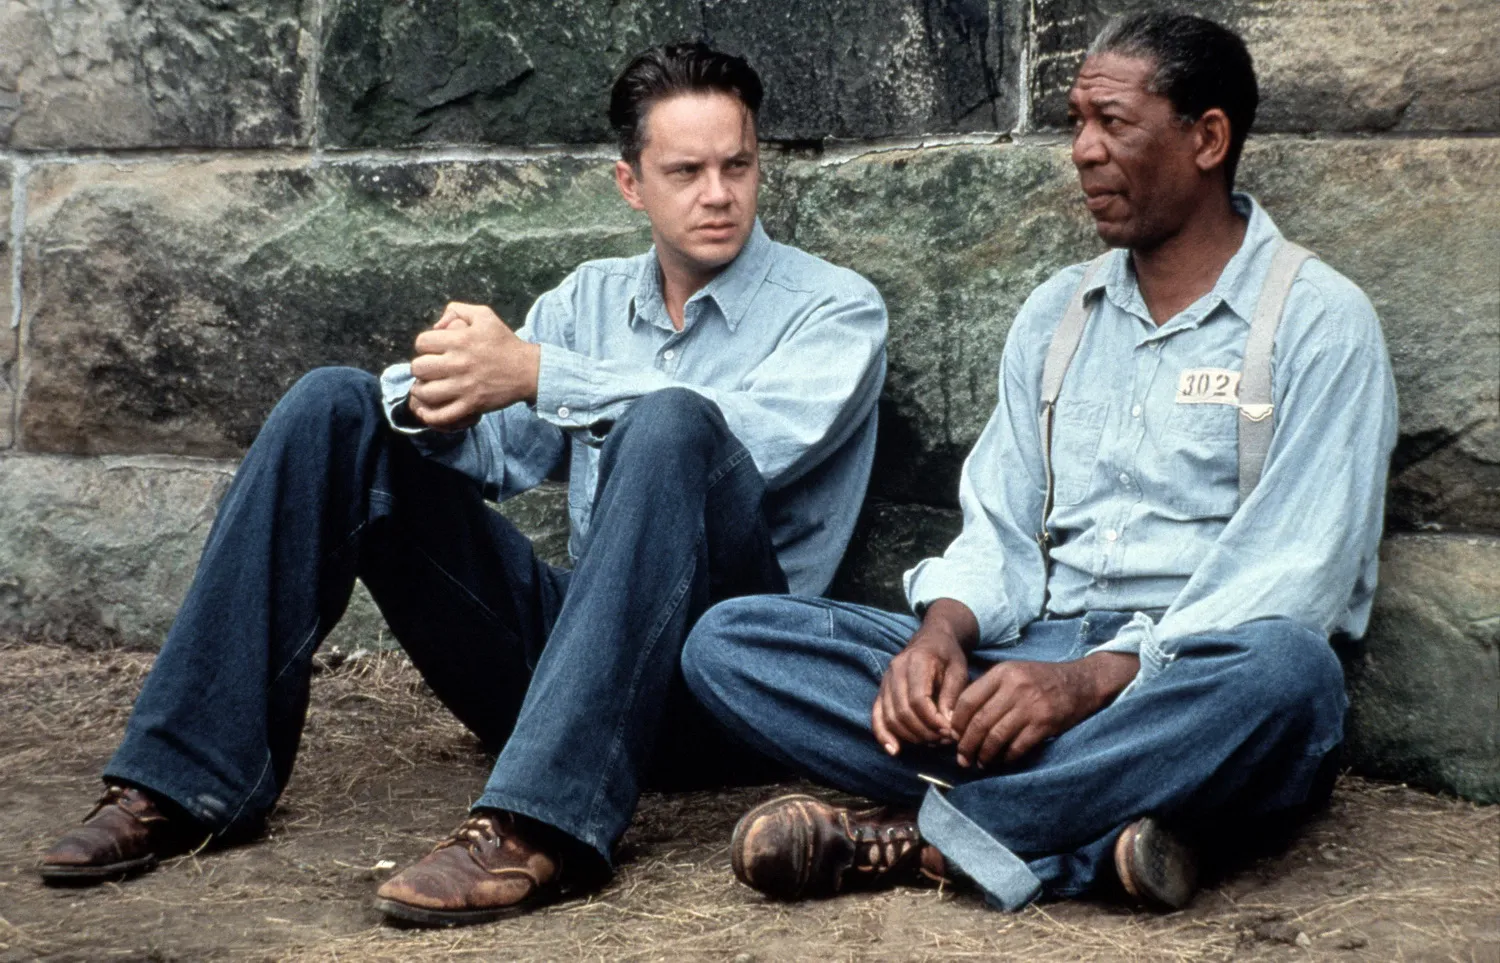 The Shawshank Redemption: Andy in his tranquil state